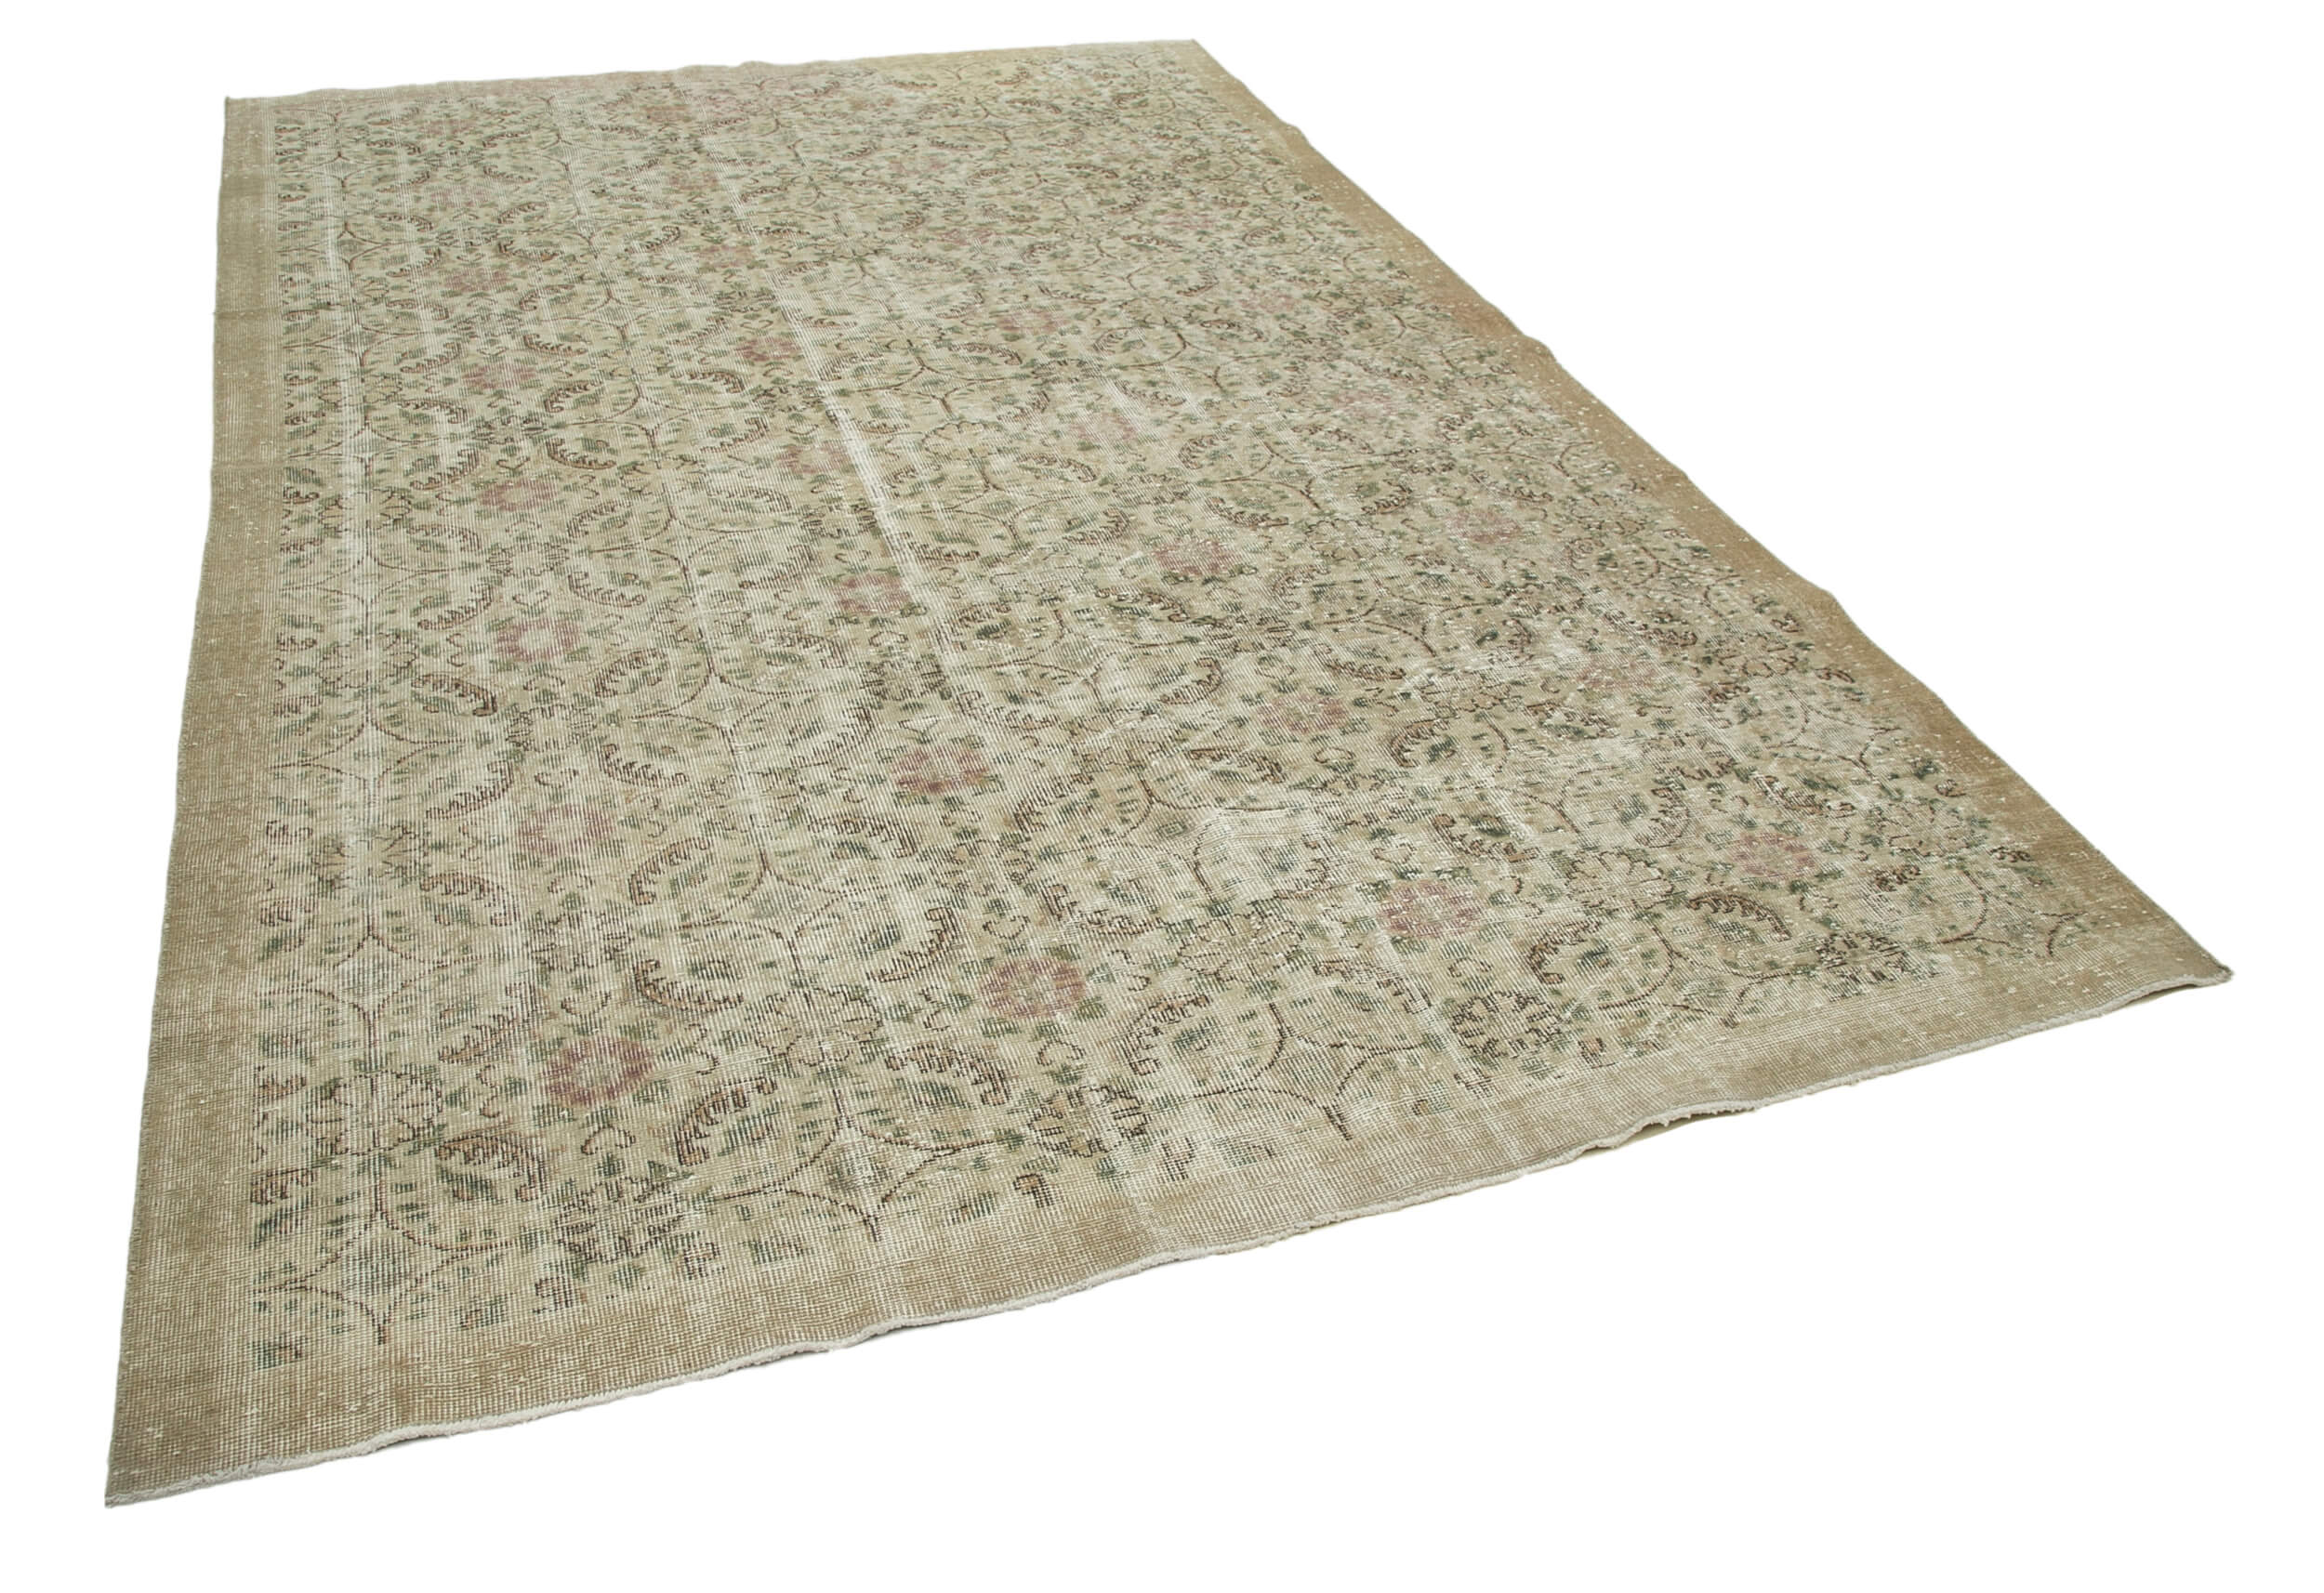 Handmade White Wash Area Rug > Design# OL-AC-25274 > Size: 6'-10" x 10'-7", Carpet Culture Rugs, Handmade Rugs, NYC Rugs, New Rugs, Shop Rugs, Rug Store, Outlet Rugs, SoHo Rugs, Rugs in USA